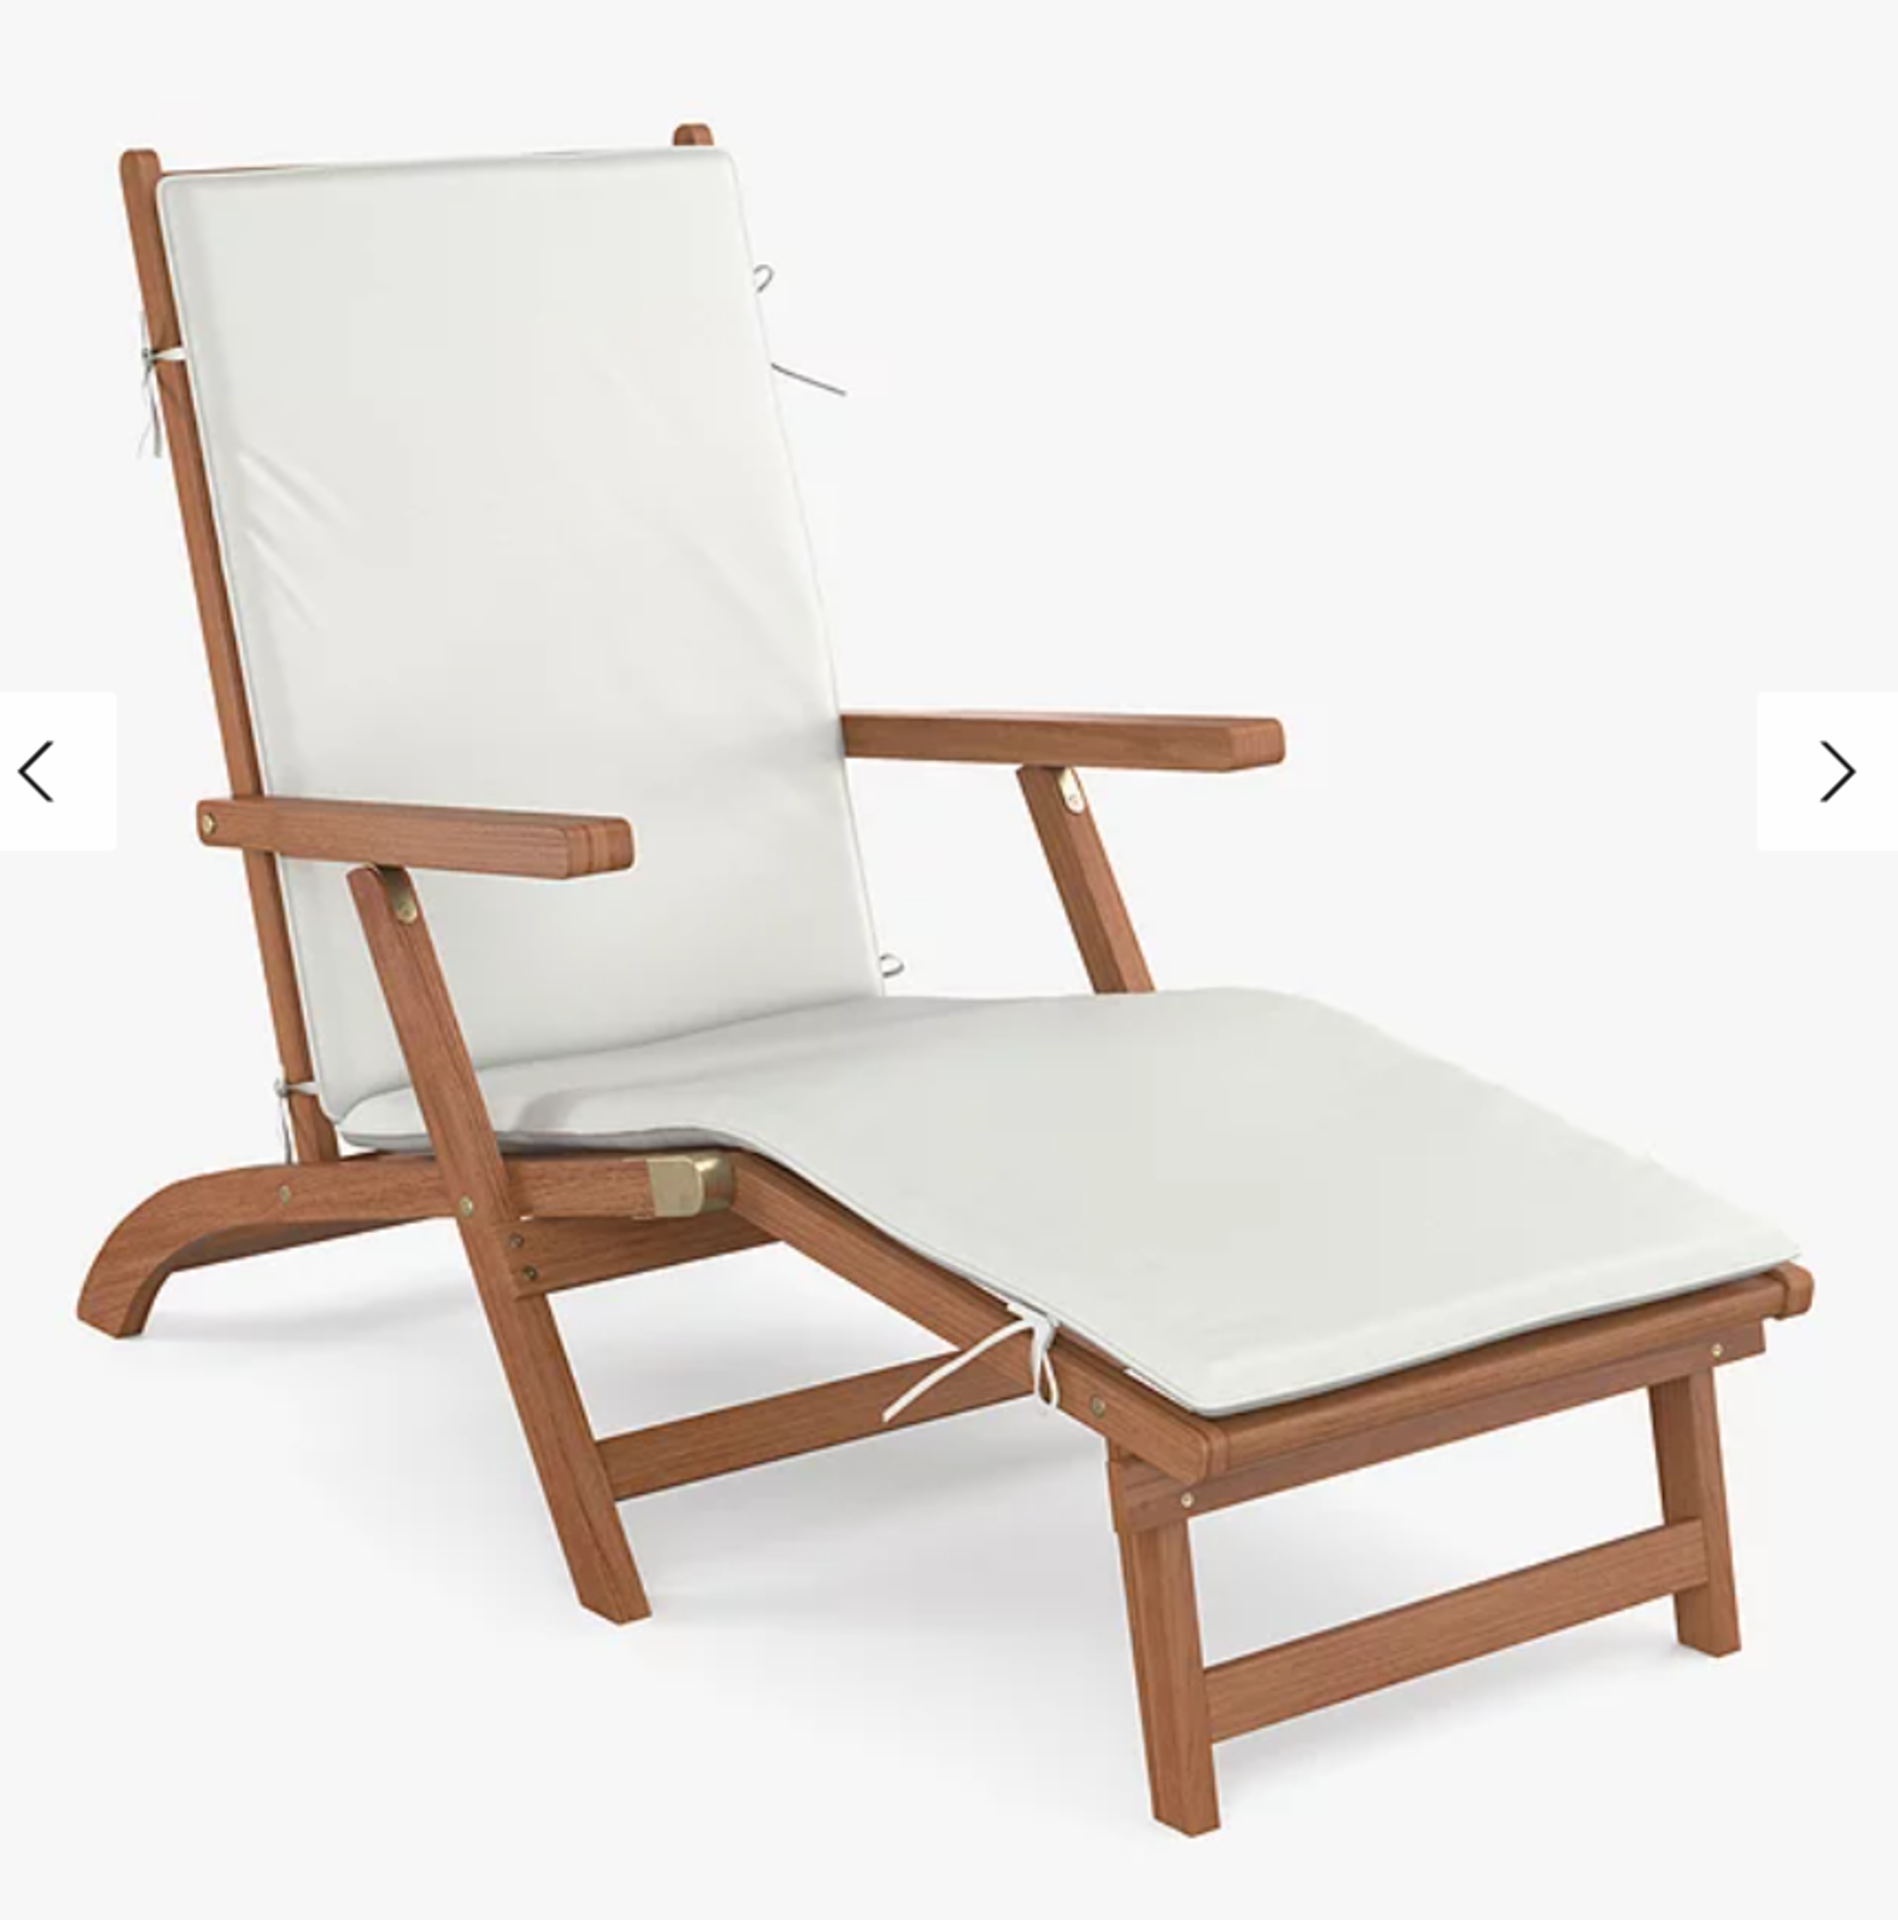 2 x New & Boxed John Lewis Cove Garden Steamer Chair, FSC-Certified (Eucalyptus Wood), Natural. - Image 4 of 5